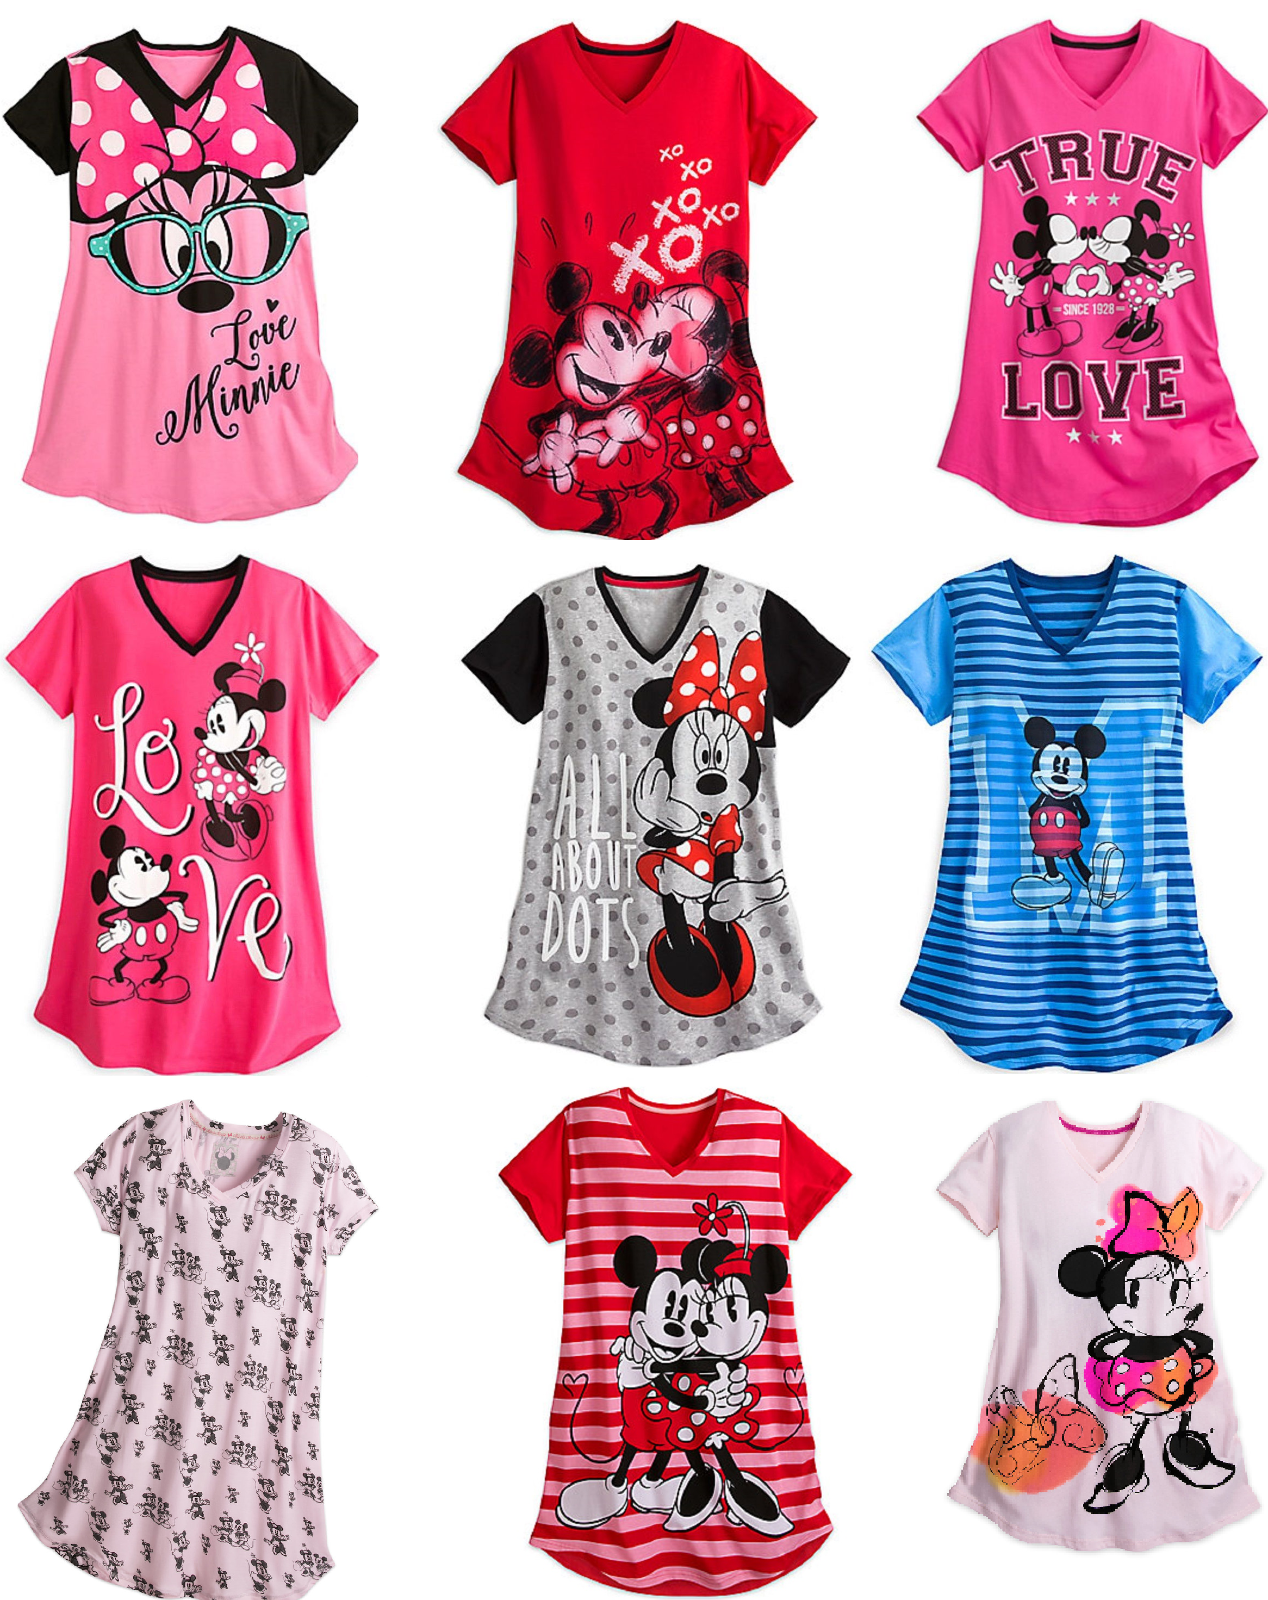 Disney Mickey and Minnie Mouse Nightshirt for Women